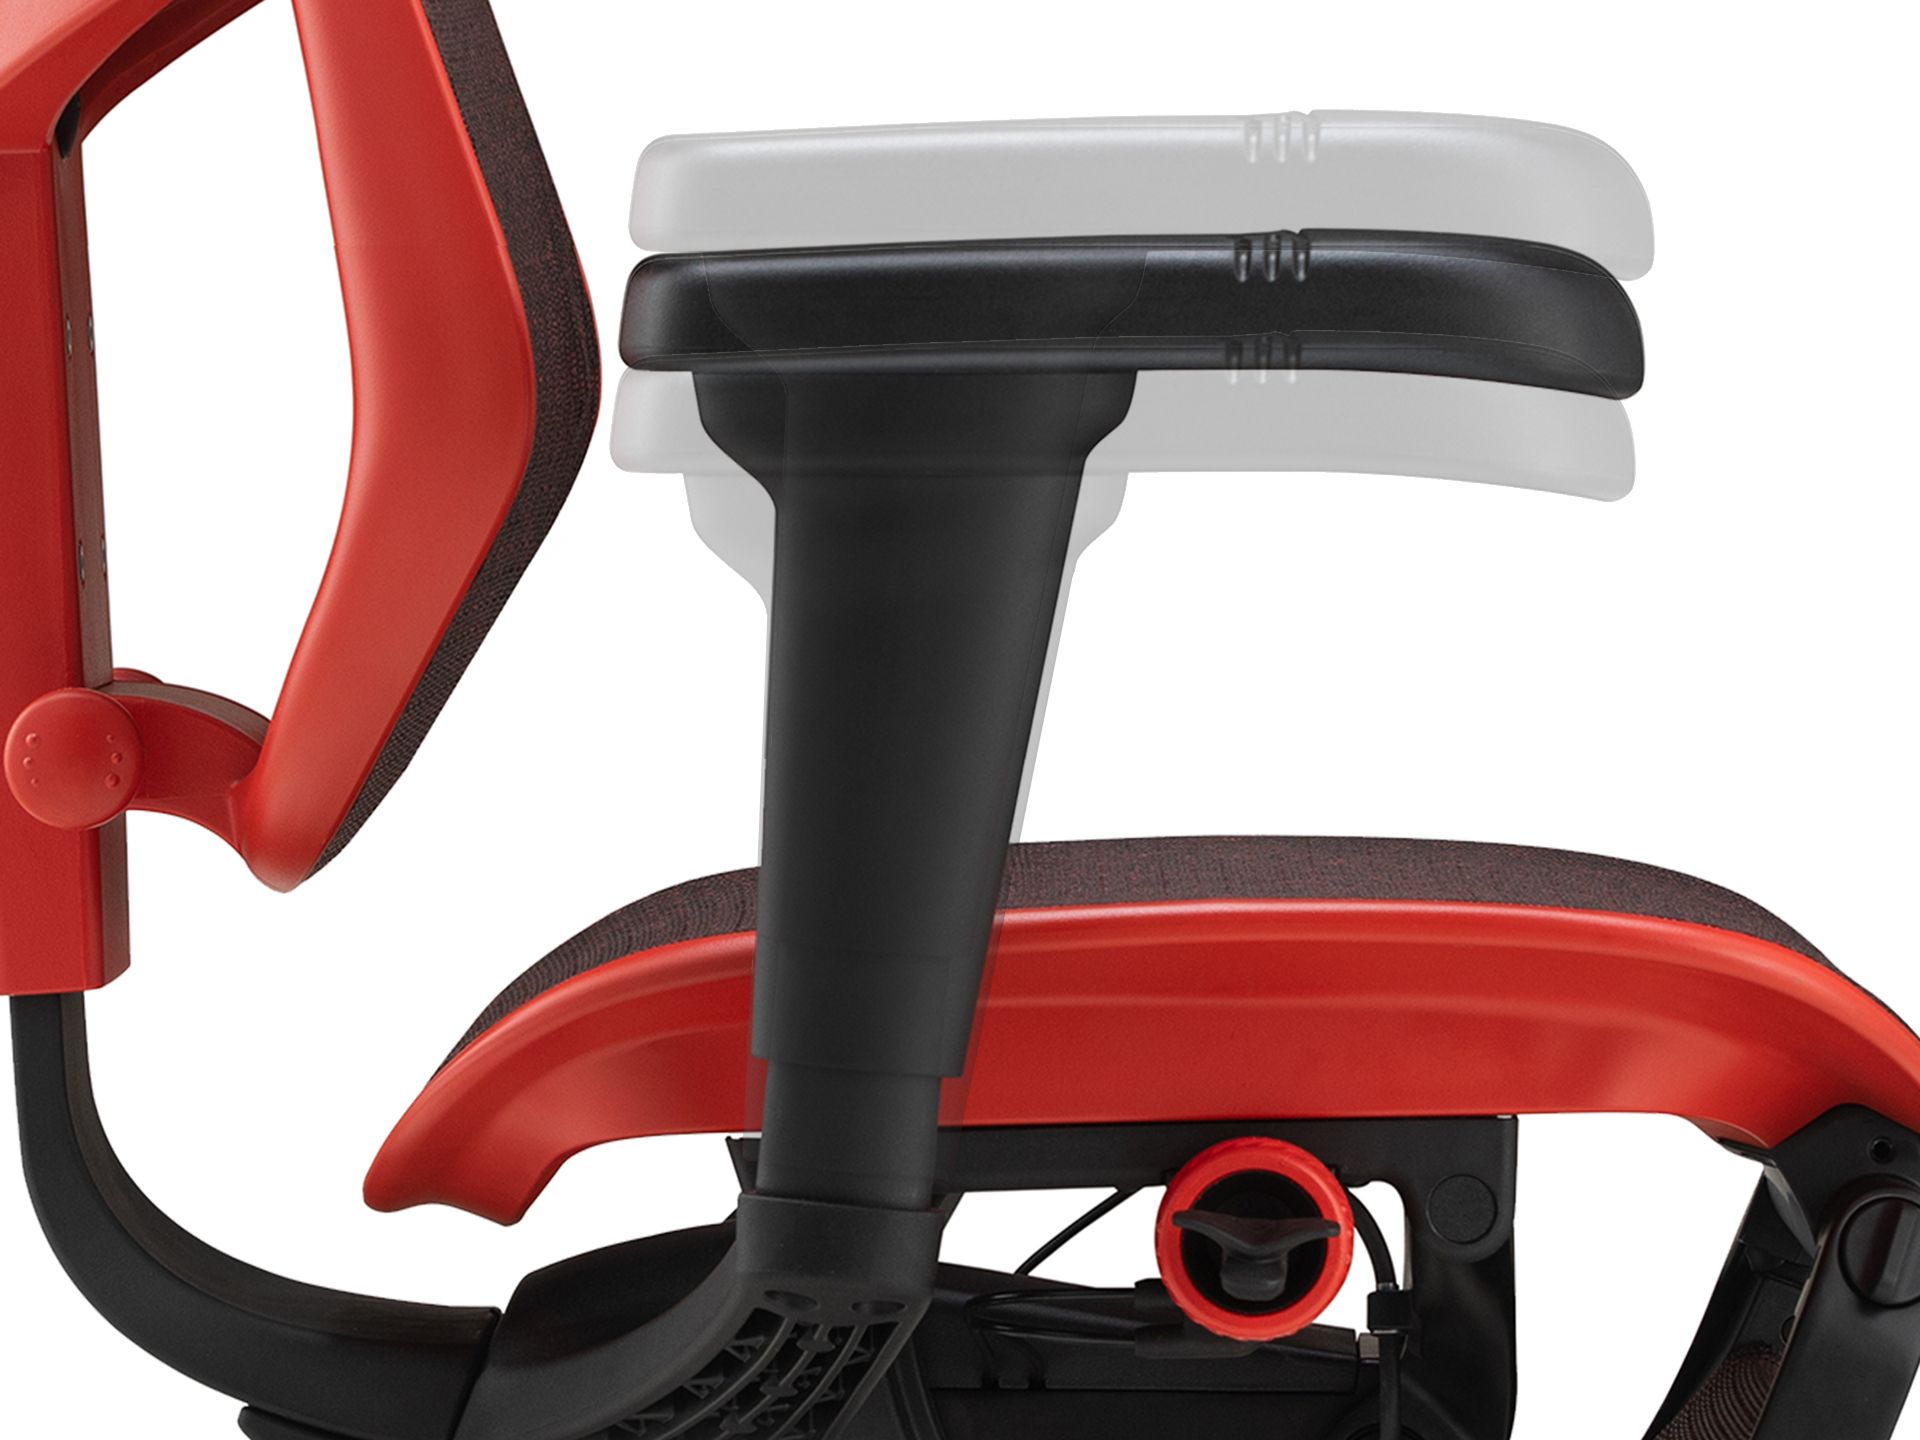 Profile view of the Enjoy Ultra gaming chair armrest, showcasing height adjustment